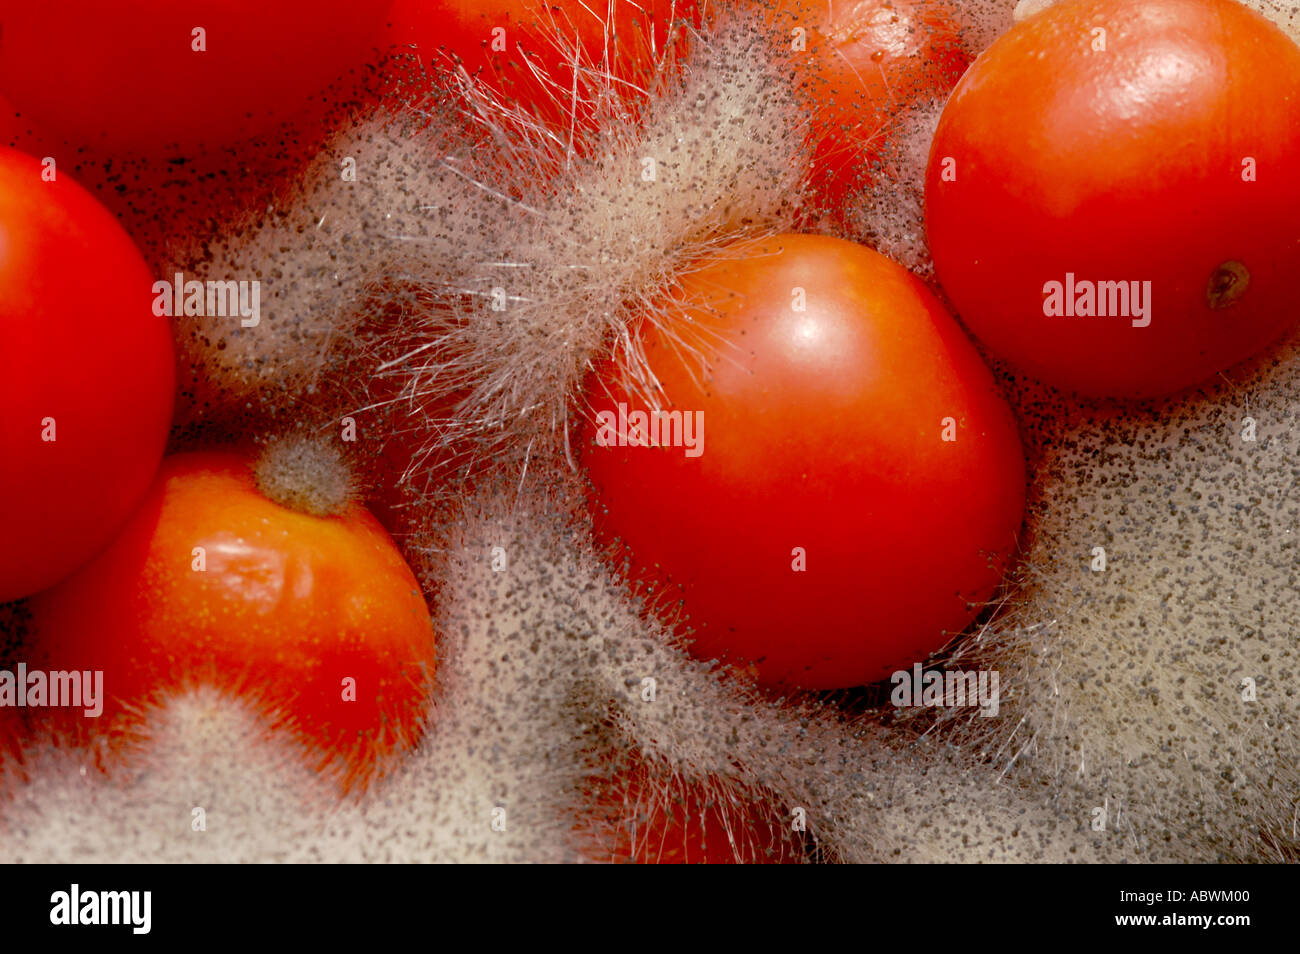 Pin mould growing on tomatoes Stock Photo - Alamy